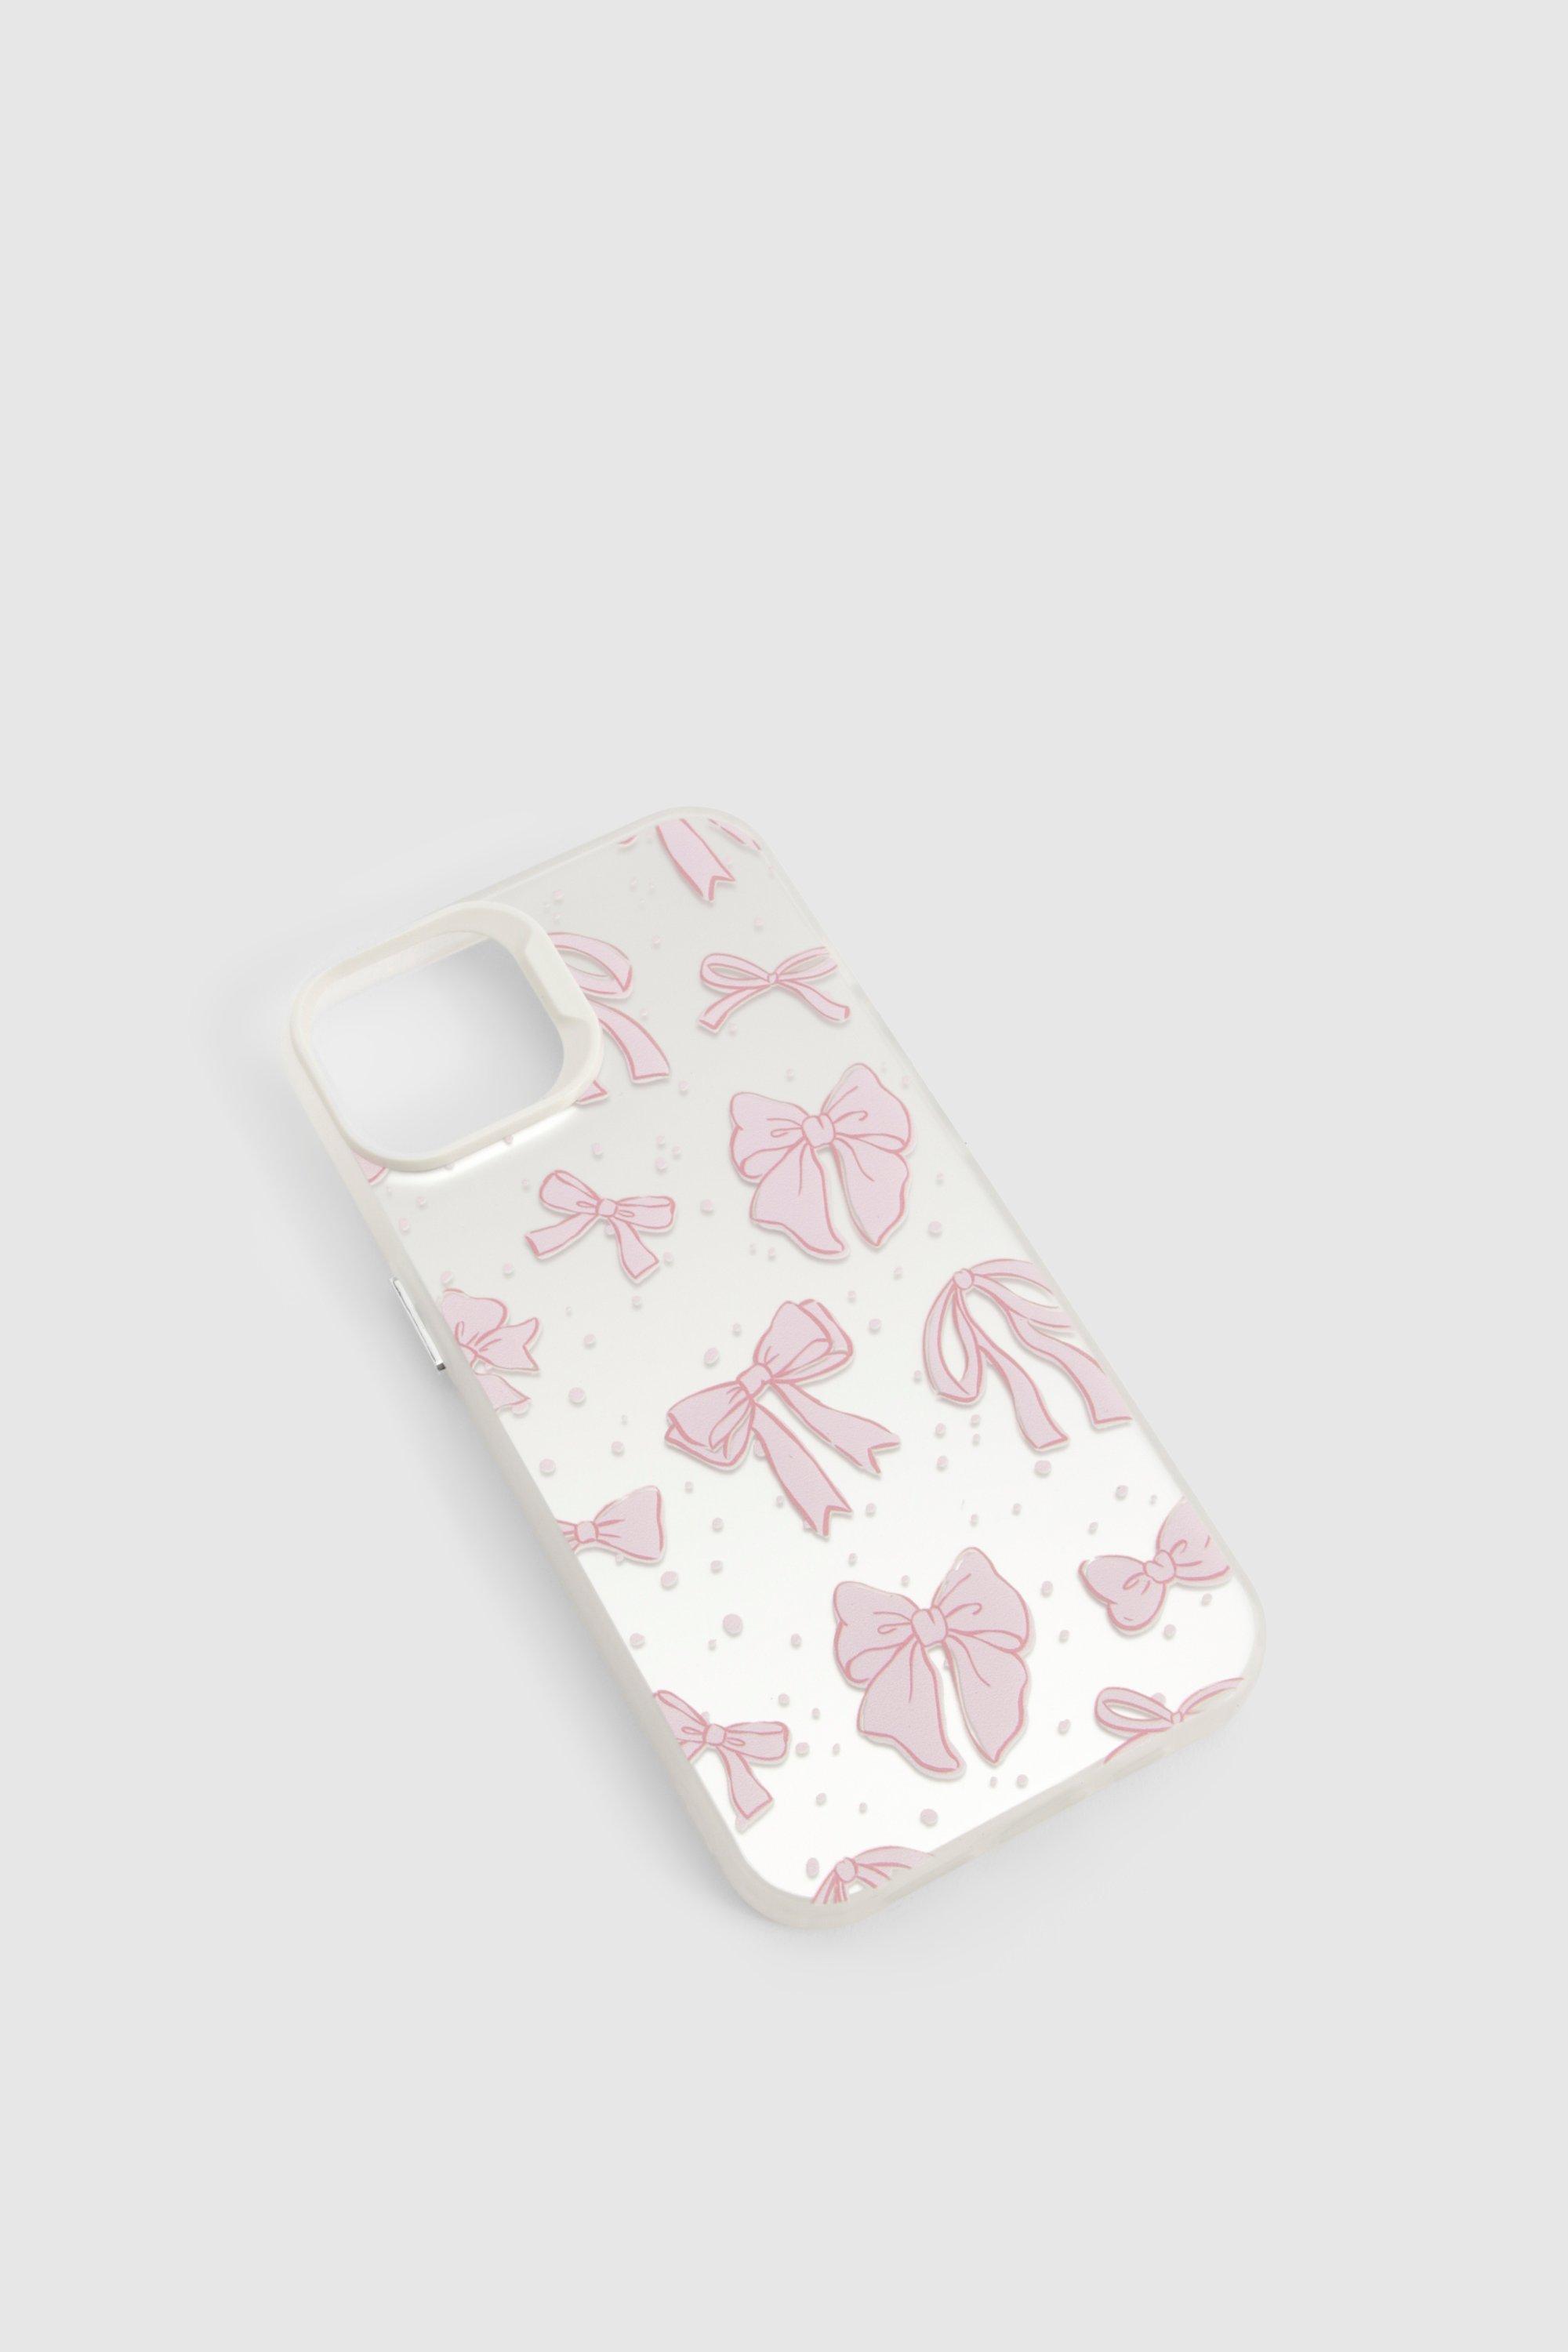 Image of Bow Patterned Phone Case, Pink